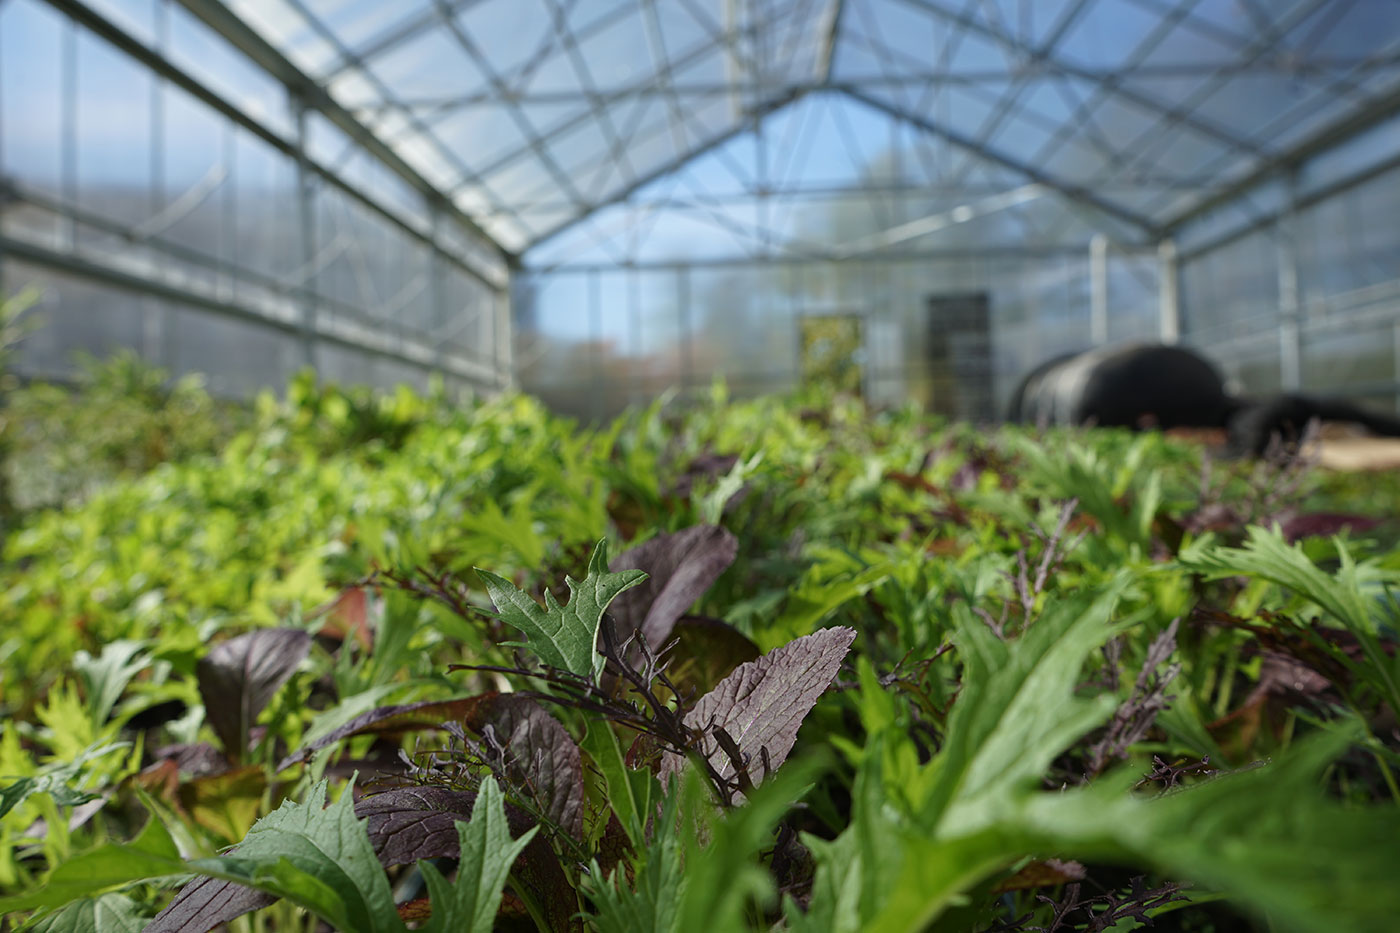 small crops can be seen beginning to grow within a greenhouse.